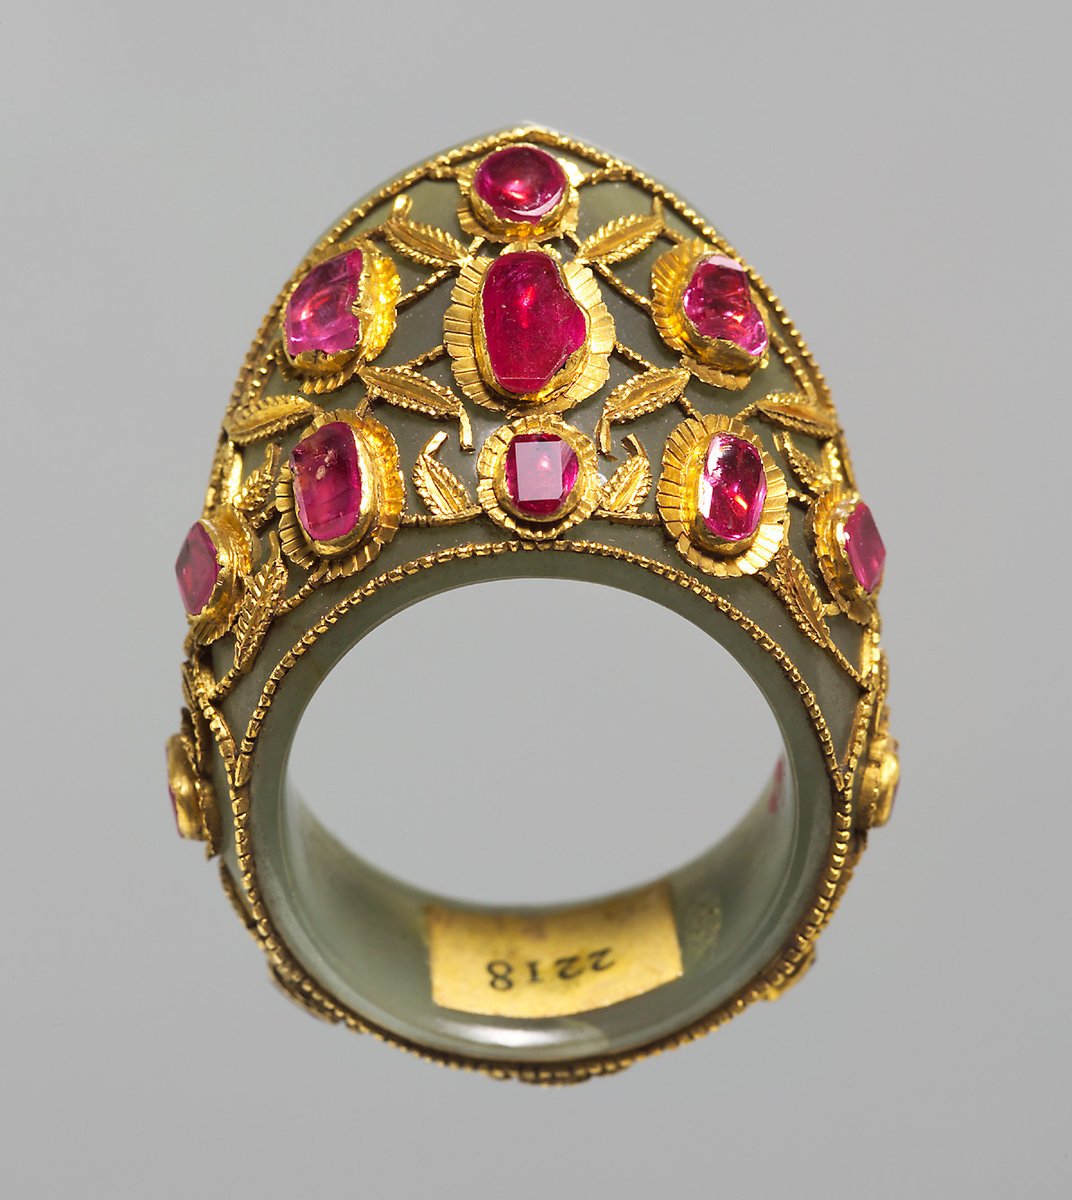 A bow ring from Istanbul, 2nd half of the 16th century Nephrite, gold, rubies. (Kunsthistorisches Museum Wien)